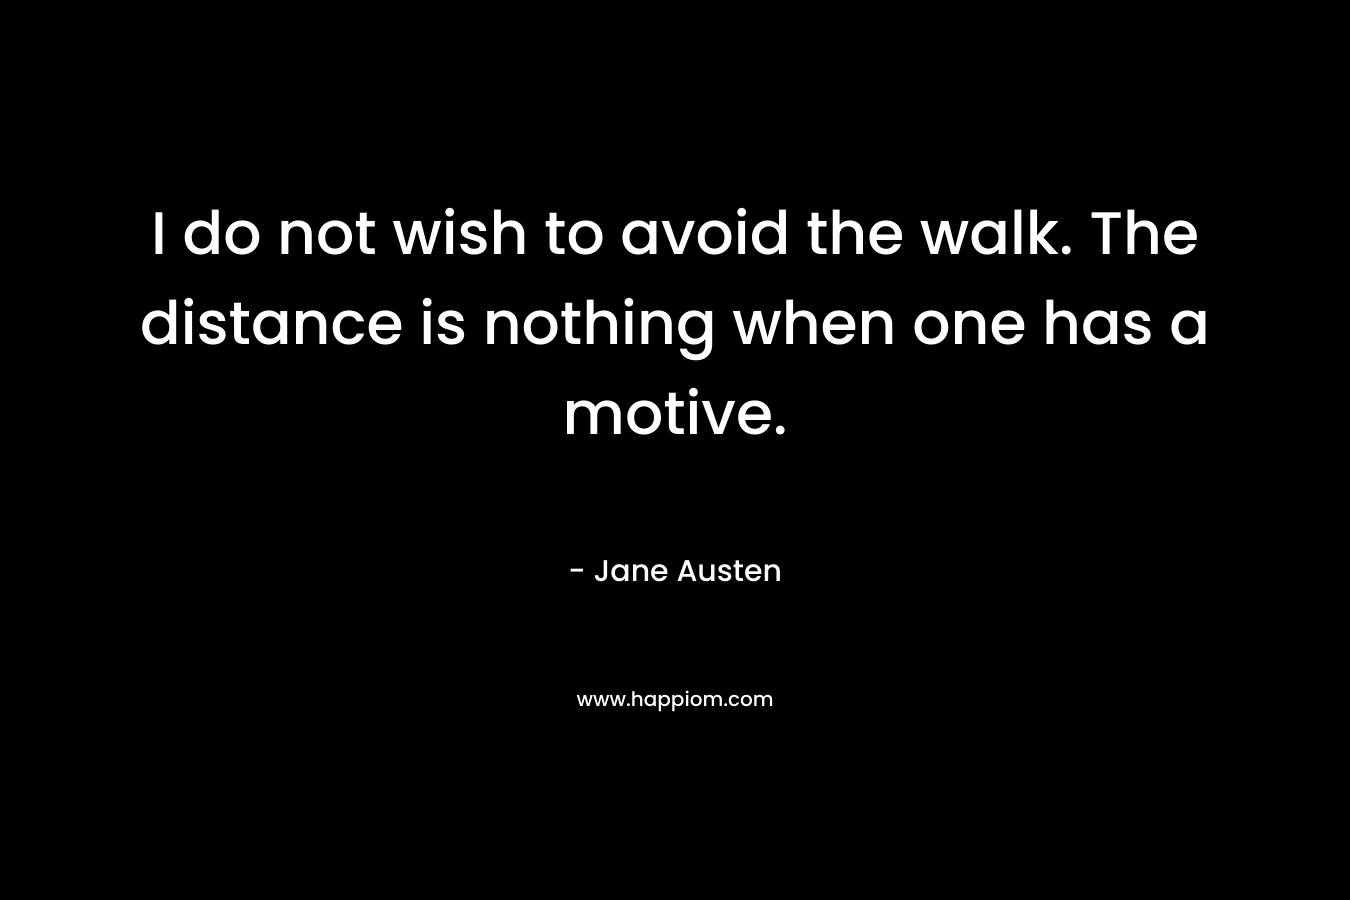 I do not wish to avoid the walk. The distance is nothing when one has a motive. – Jane Austen